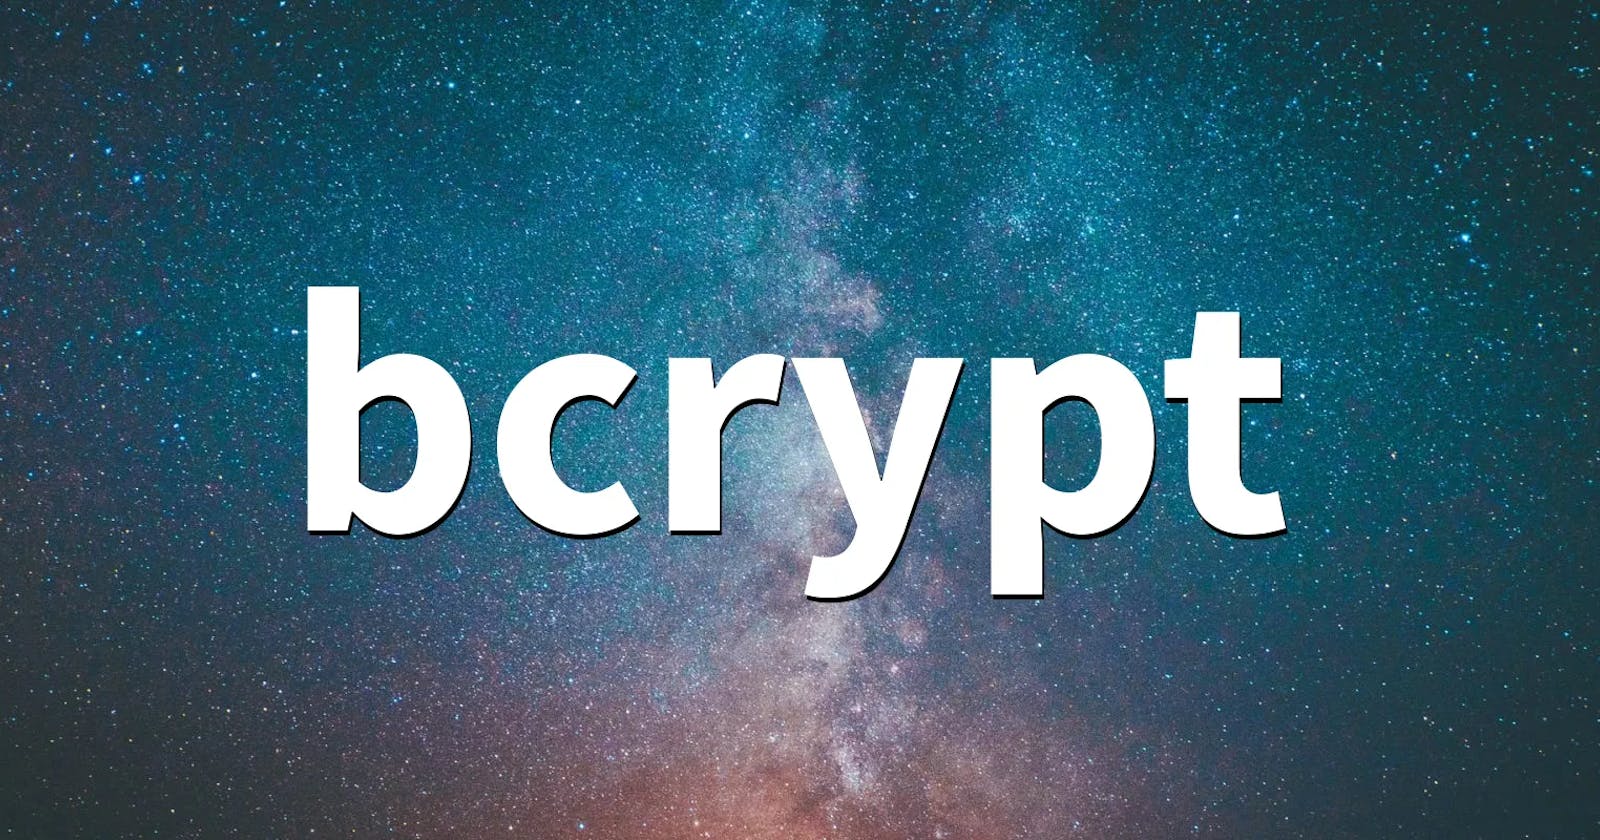 What is Bcrypt. How to use it to hash passwords